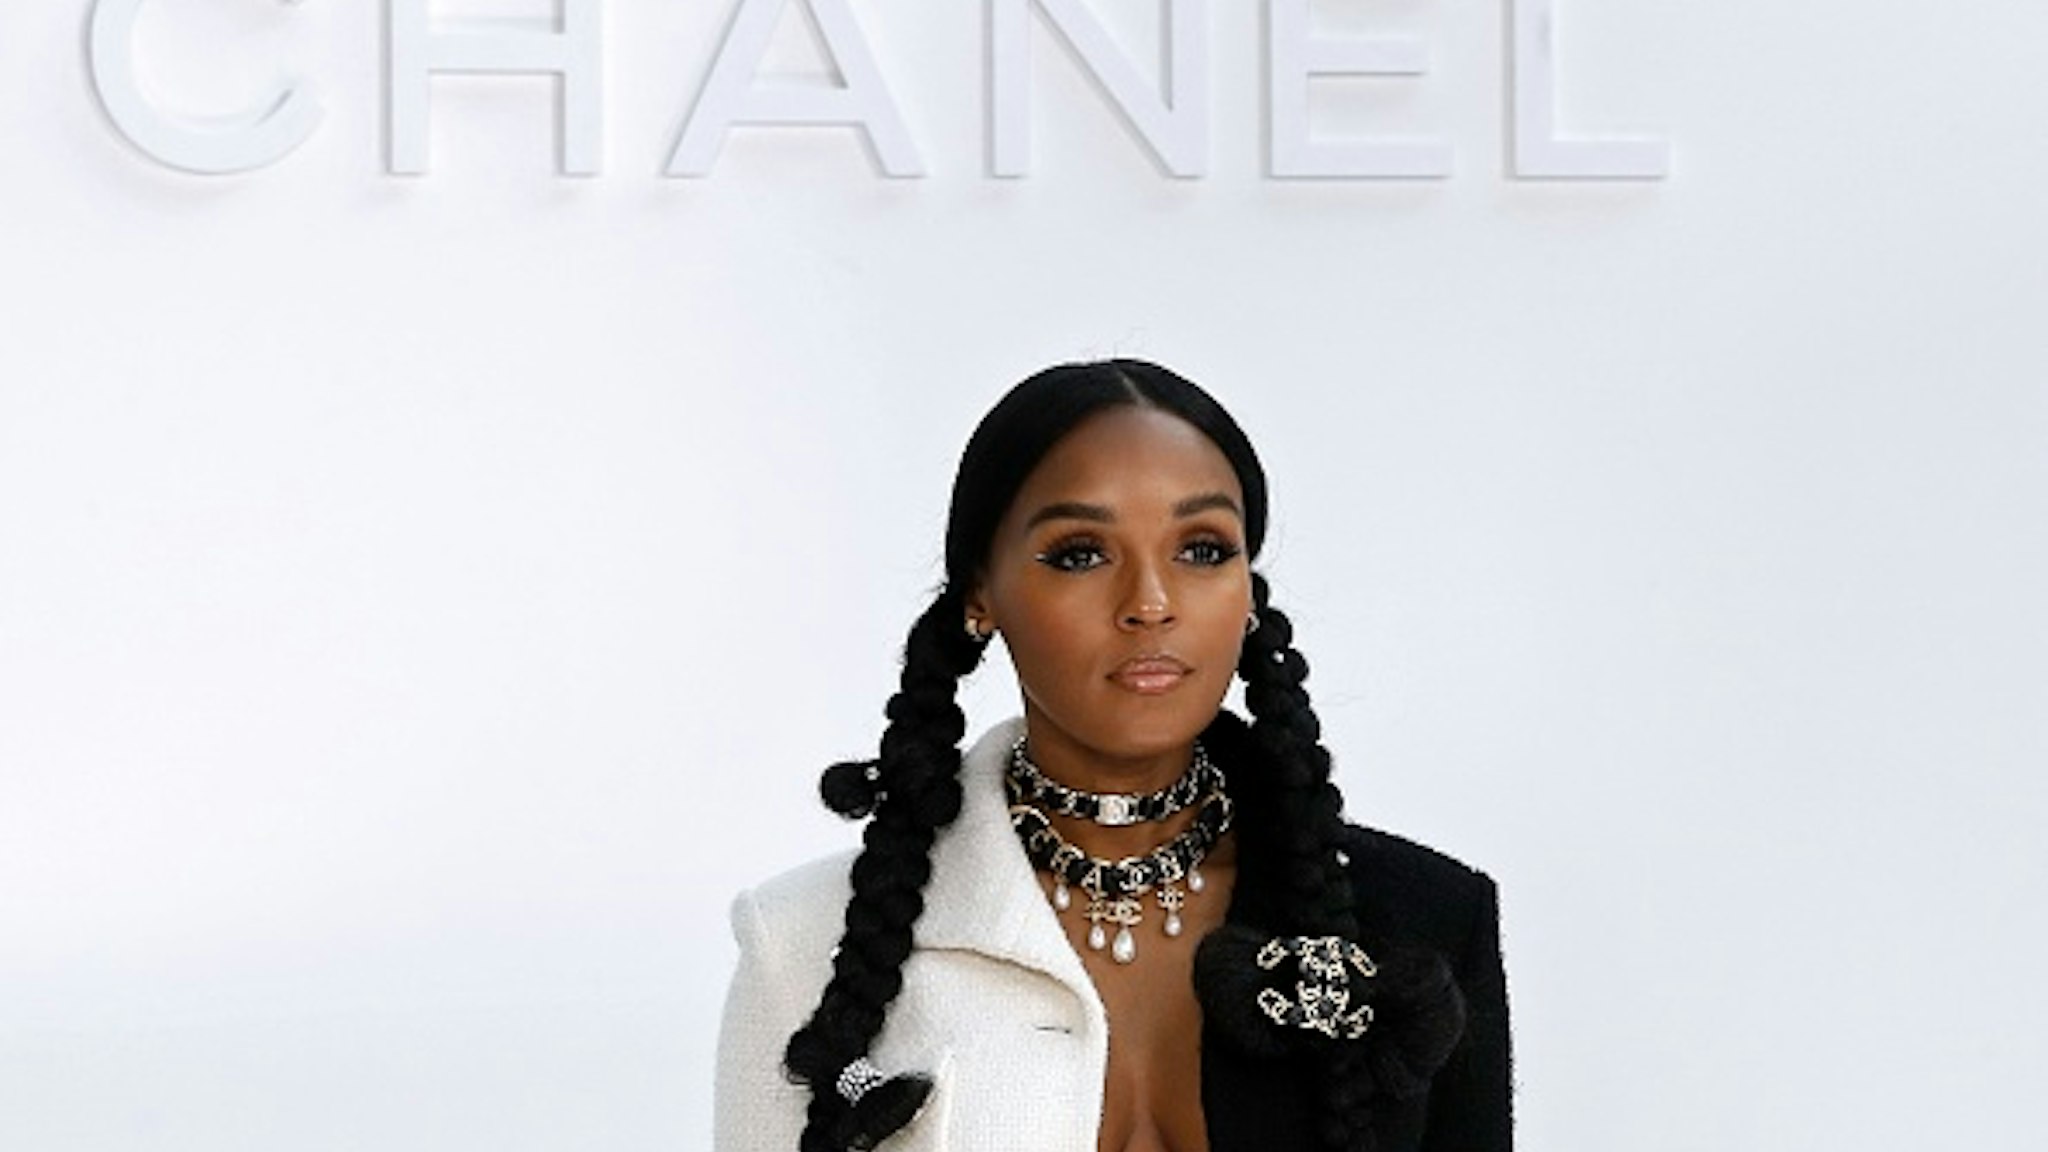 US singer, actress and producer Janelle Monae poses during the photocall prior to the Chanel Women's Fall-Winter 2020-2021 Ready-to-Wear collection fashion show at the Grand Palais in Paris, on March 3, 2020.